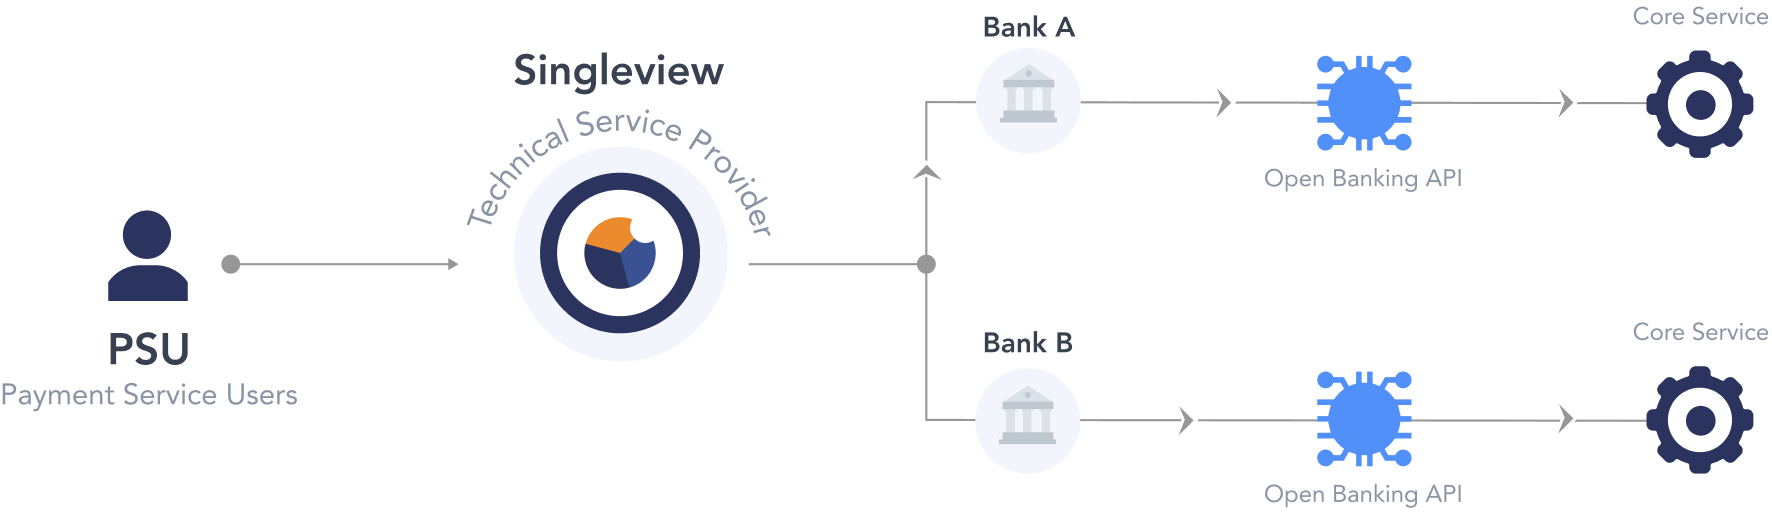 Open banking architecture